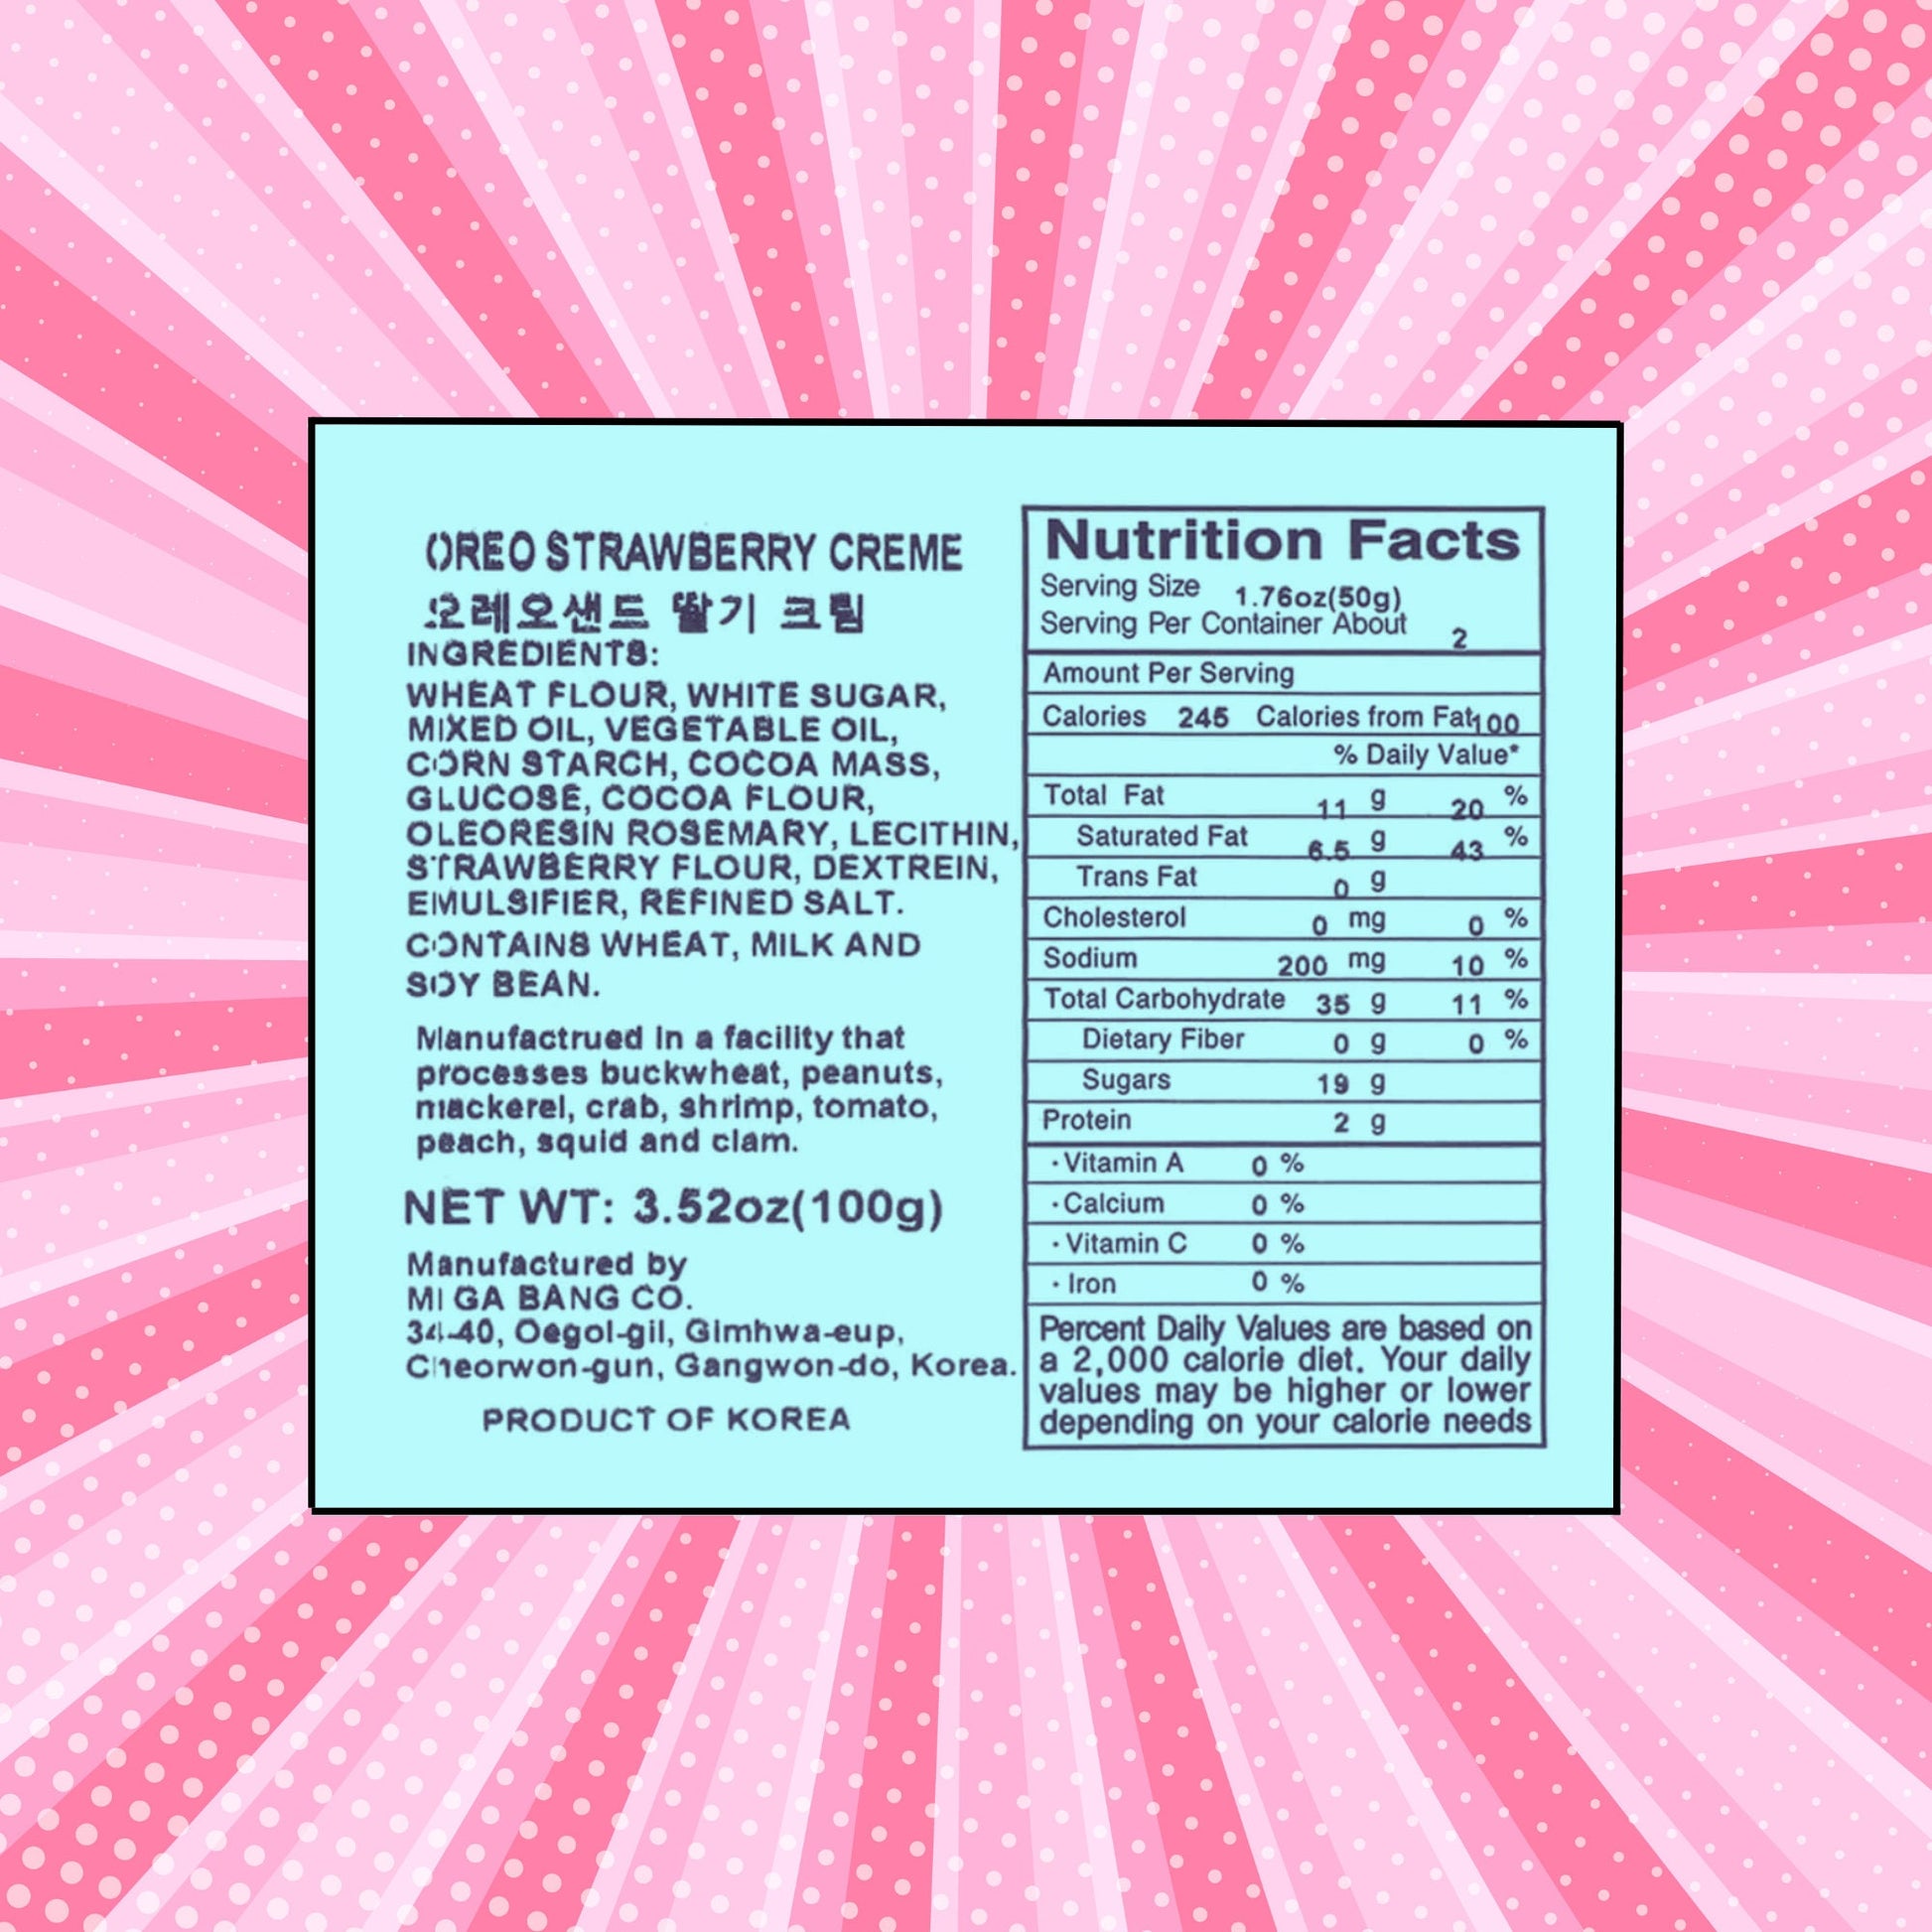 Korean Oreos - Strawberry Creme Flavor (Ingredients with Nutrition Facts)